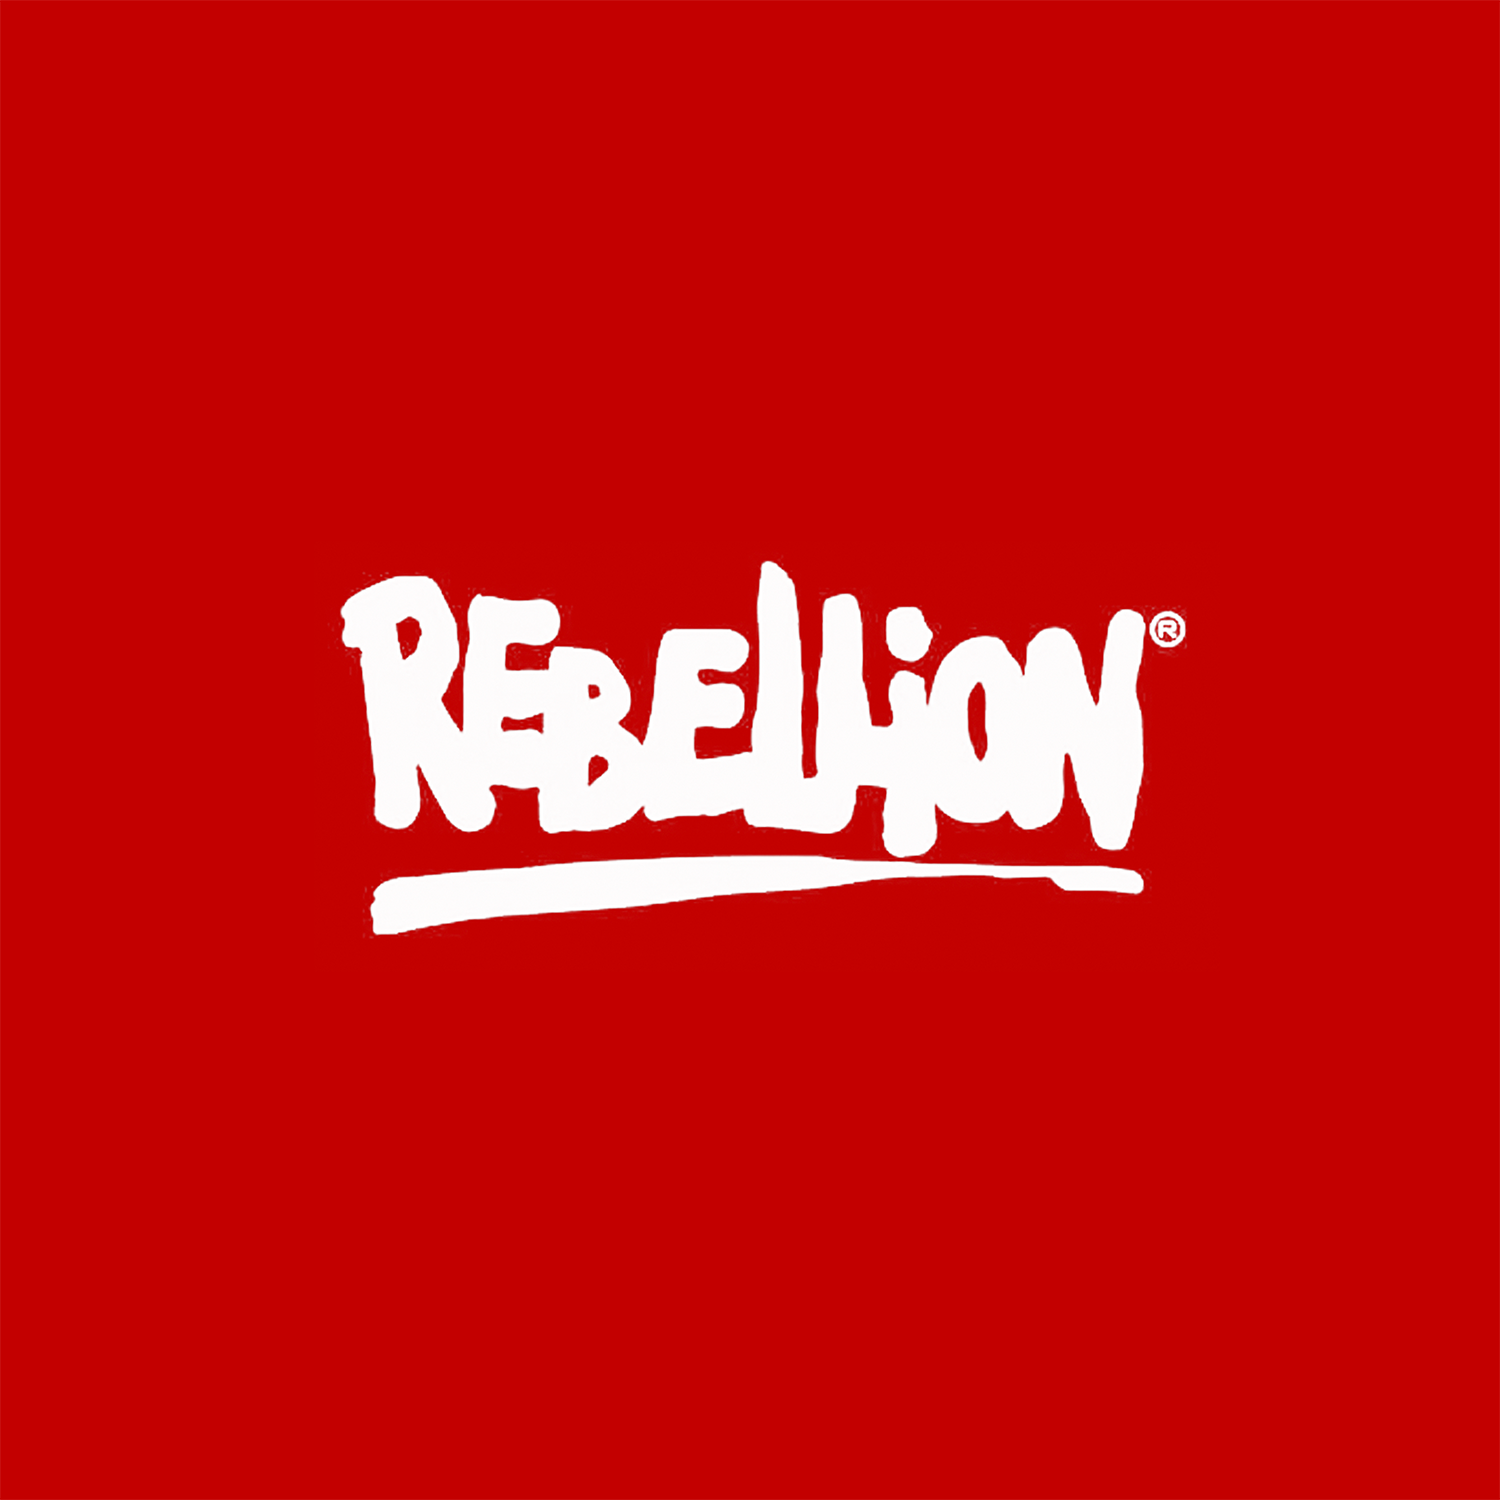 Rebellion Long-term support for one of the leading, independent, global multimedia businesses with strong track record of developing and publishing content for >30 years.